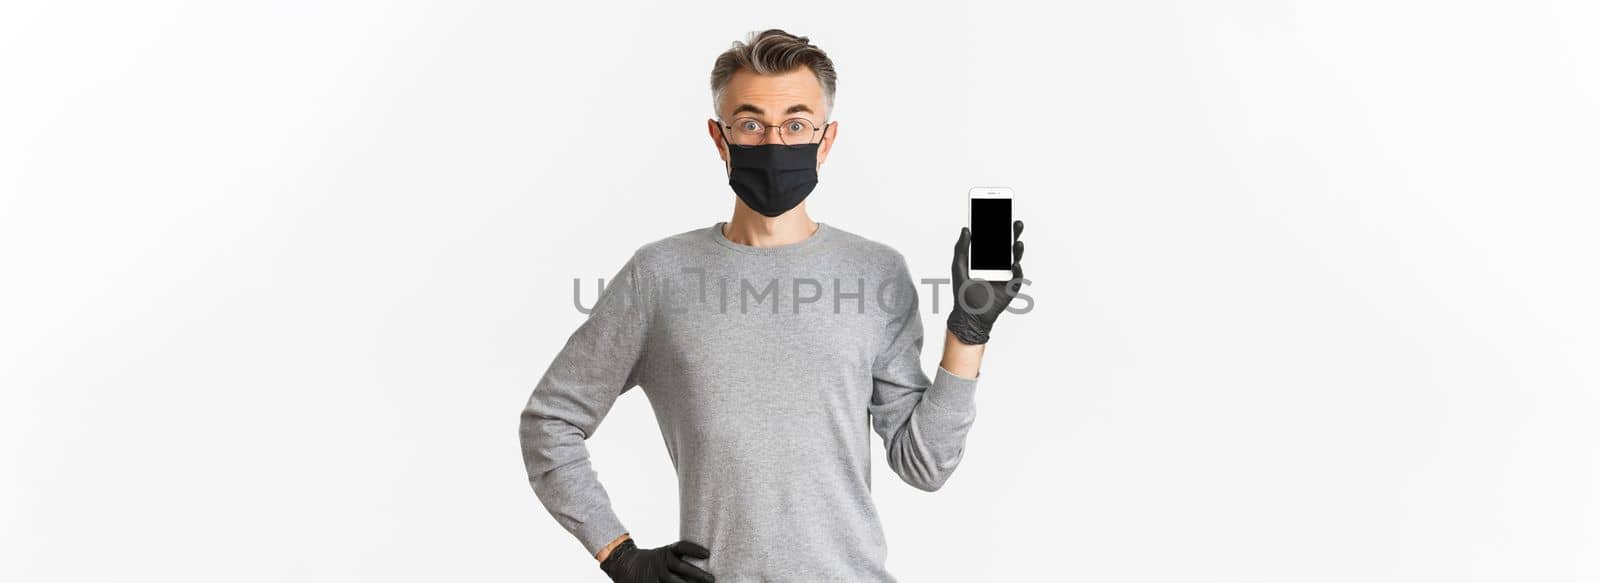 Concept of covid-19, social distancing and lifestyle. Image of surprised middle-aged man found something online, showing smartphone screen and looking amazed, wearing medical mask with gloves.